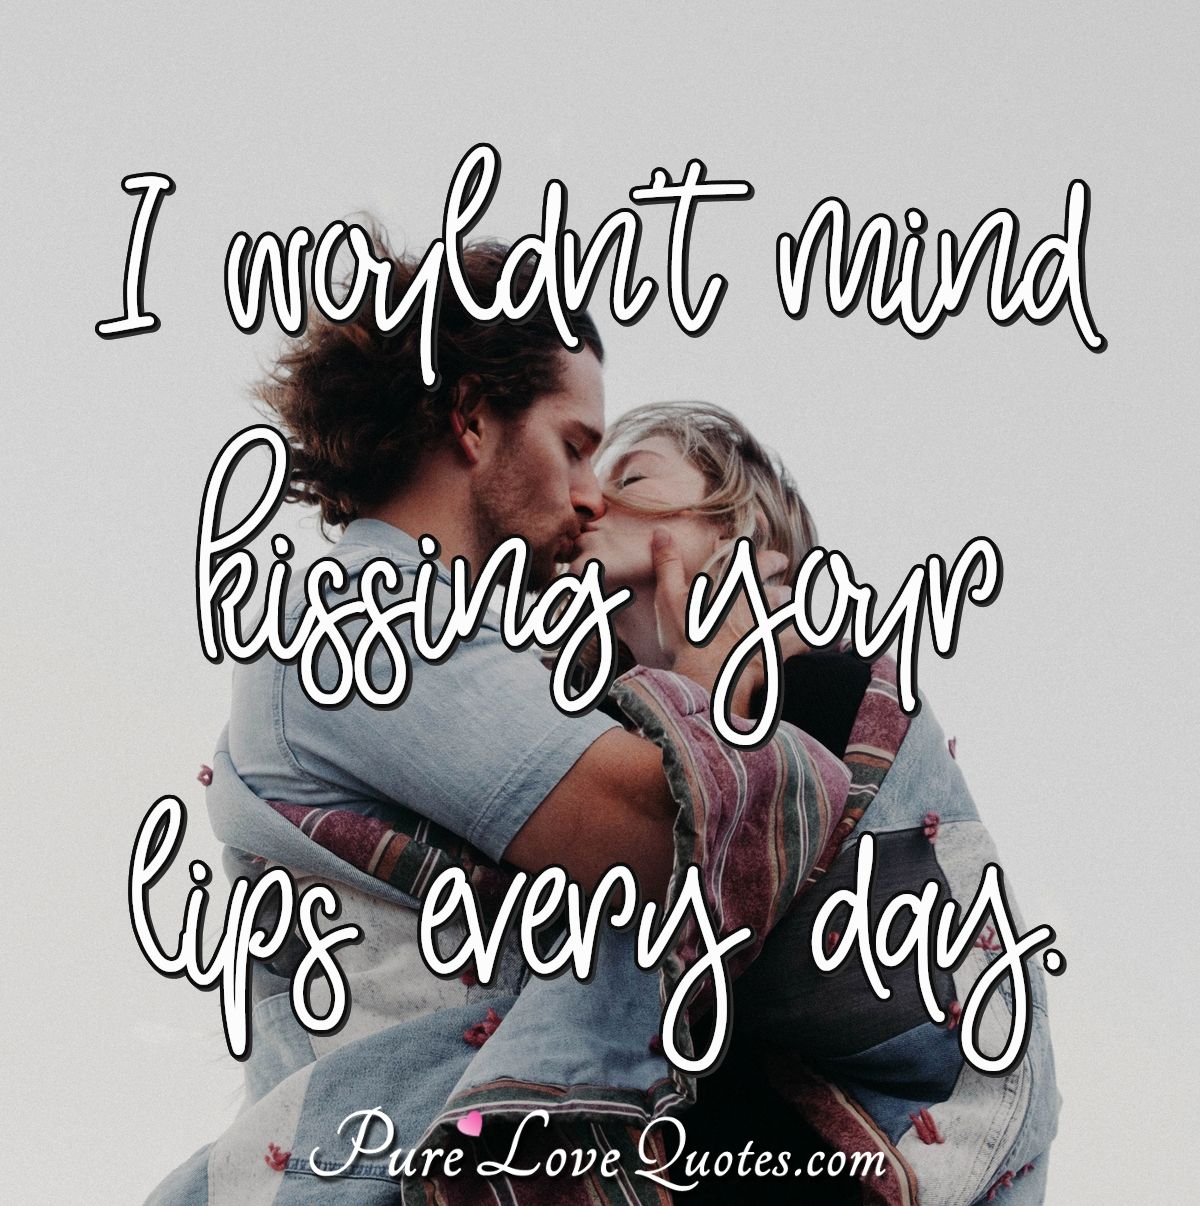 I wouldn't mind kissing your lips every day. | PureLoveQuotes